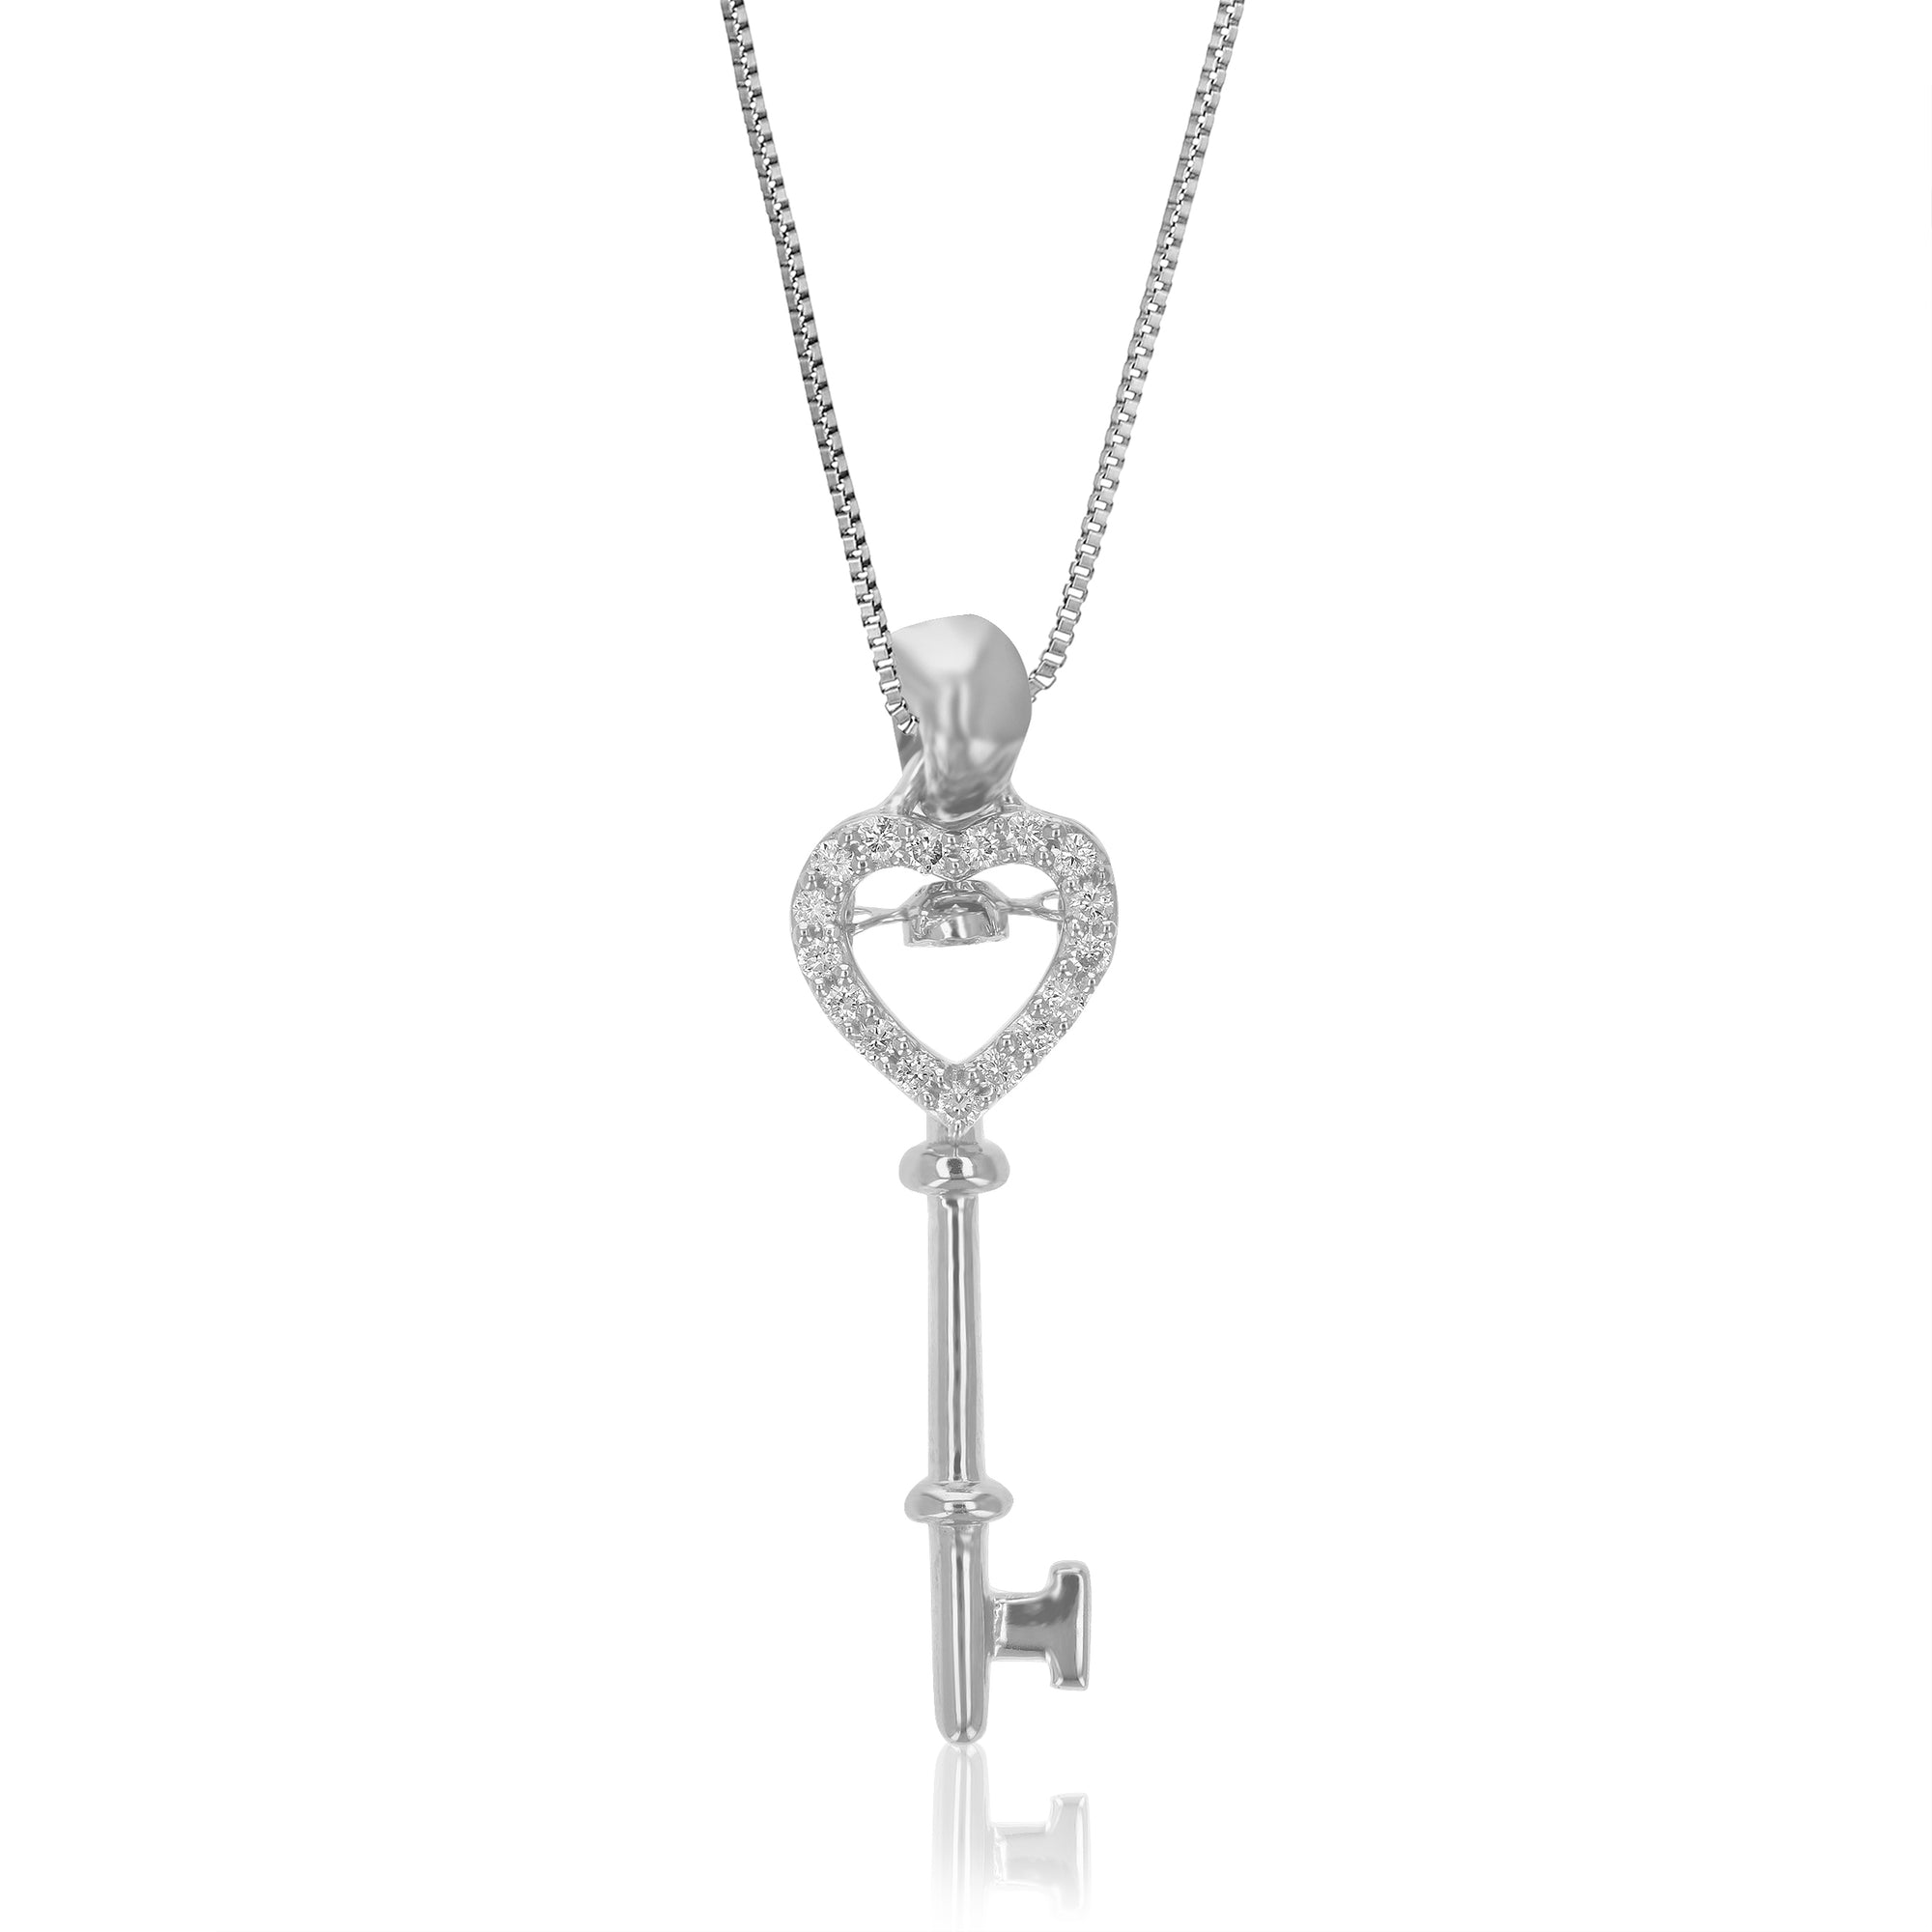 1/10 cttw Diamond Pendant Necklace for Women, Lab Grown Diamond Key Pendant Necklace in .925 Sterling Silver with Chain, Size 1 Inch